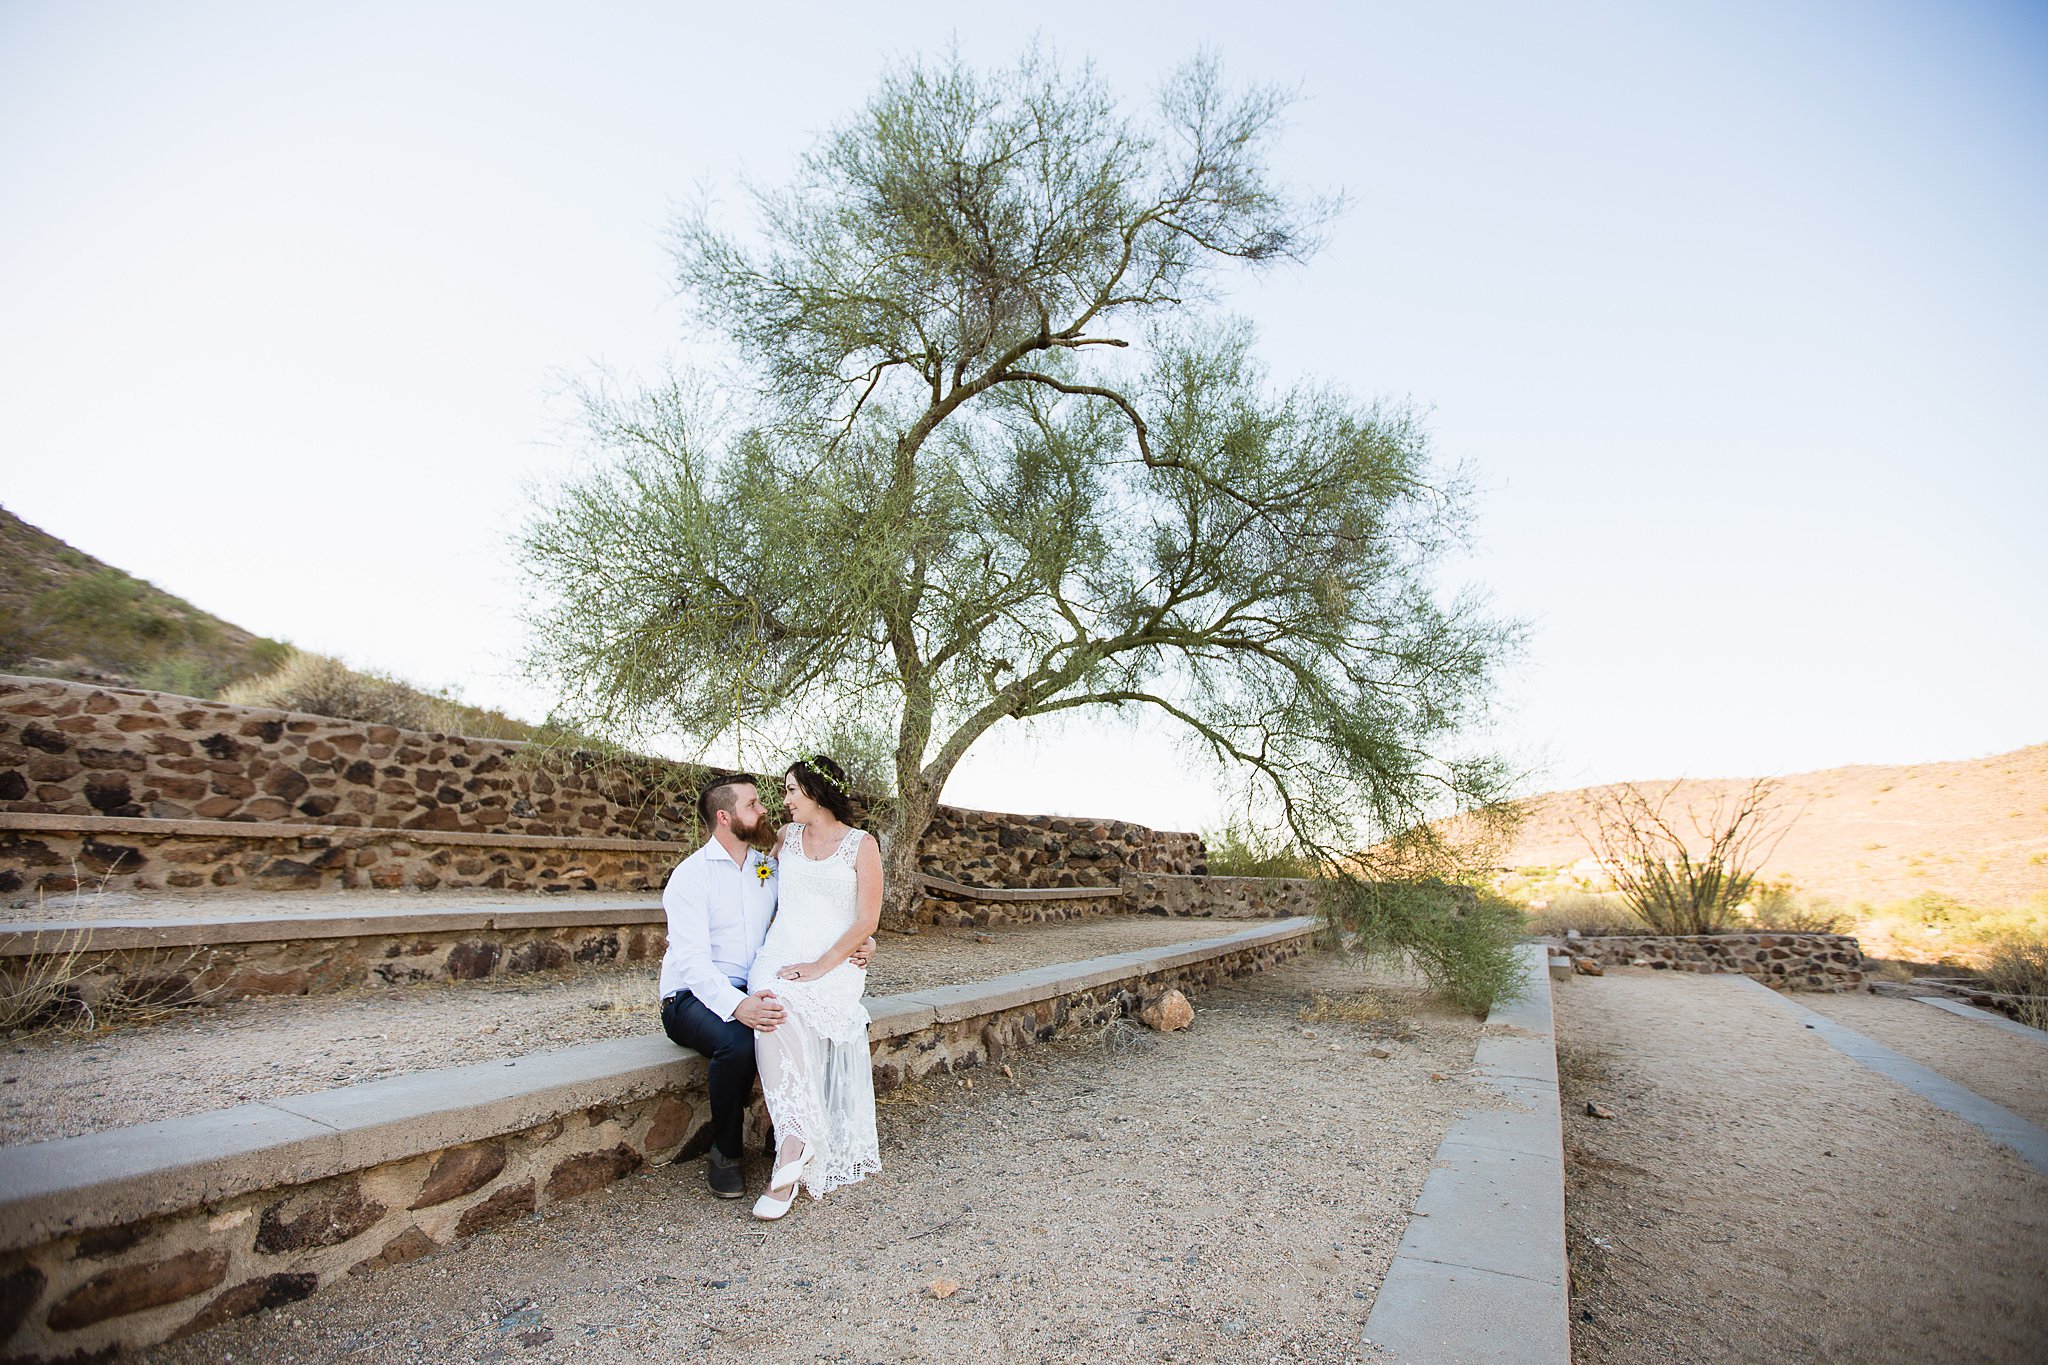 Bride and groom look at each other under a desert tree by Phoenix wedding photographer PMA Photography.